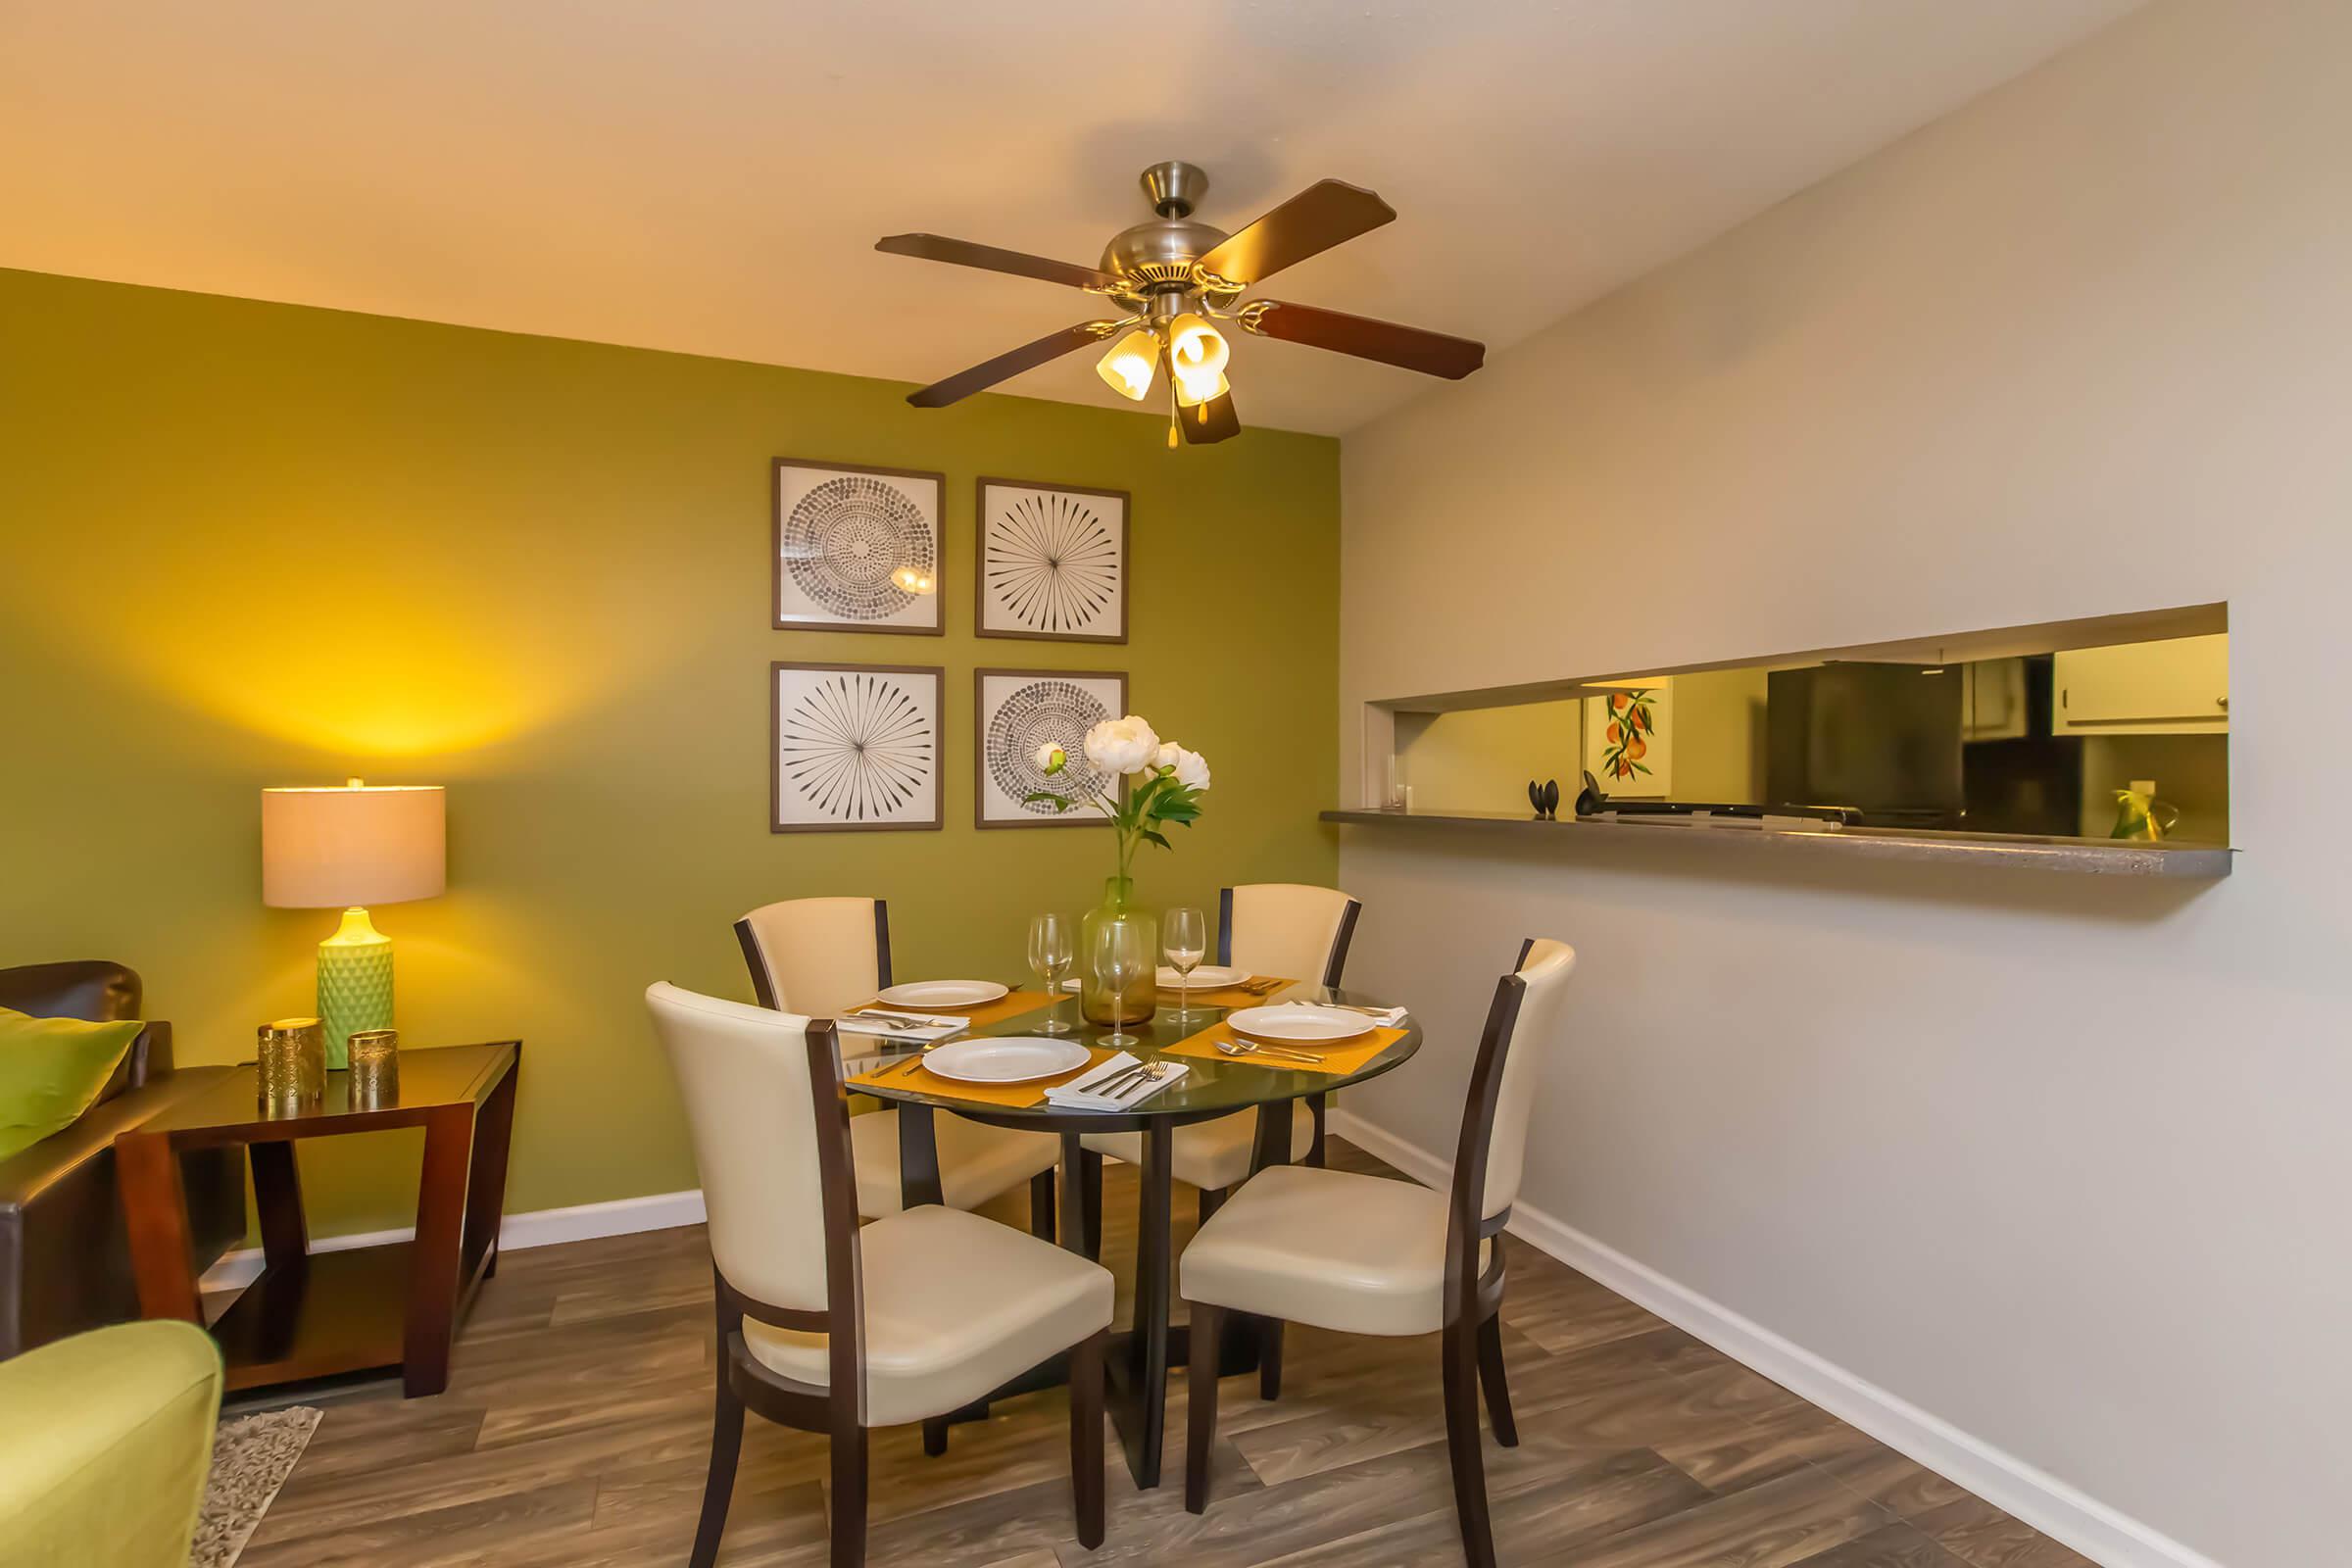 Dining Space with Ceiling Fan - Lakeside Place Apartments - Greenville - South Carolina